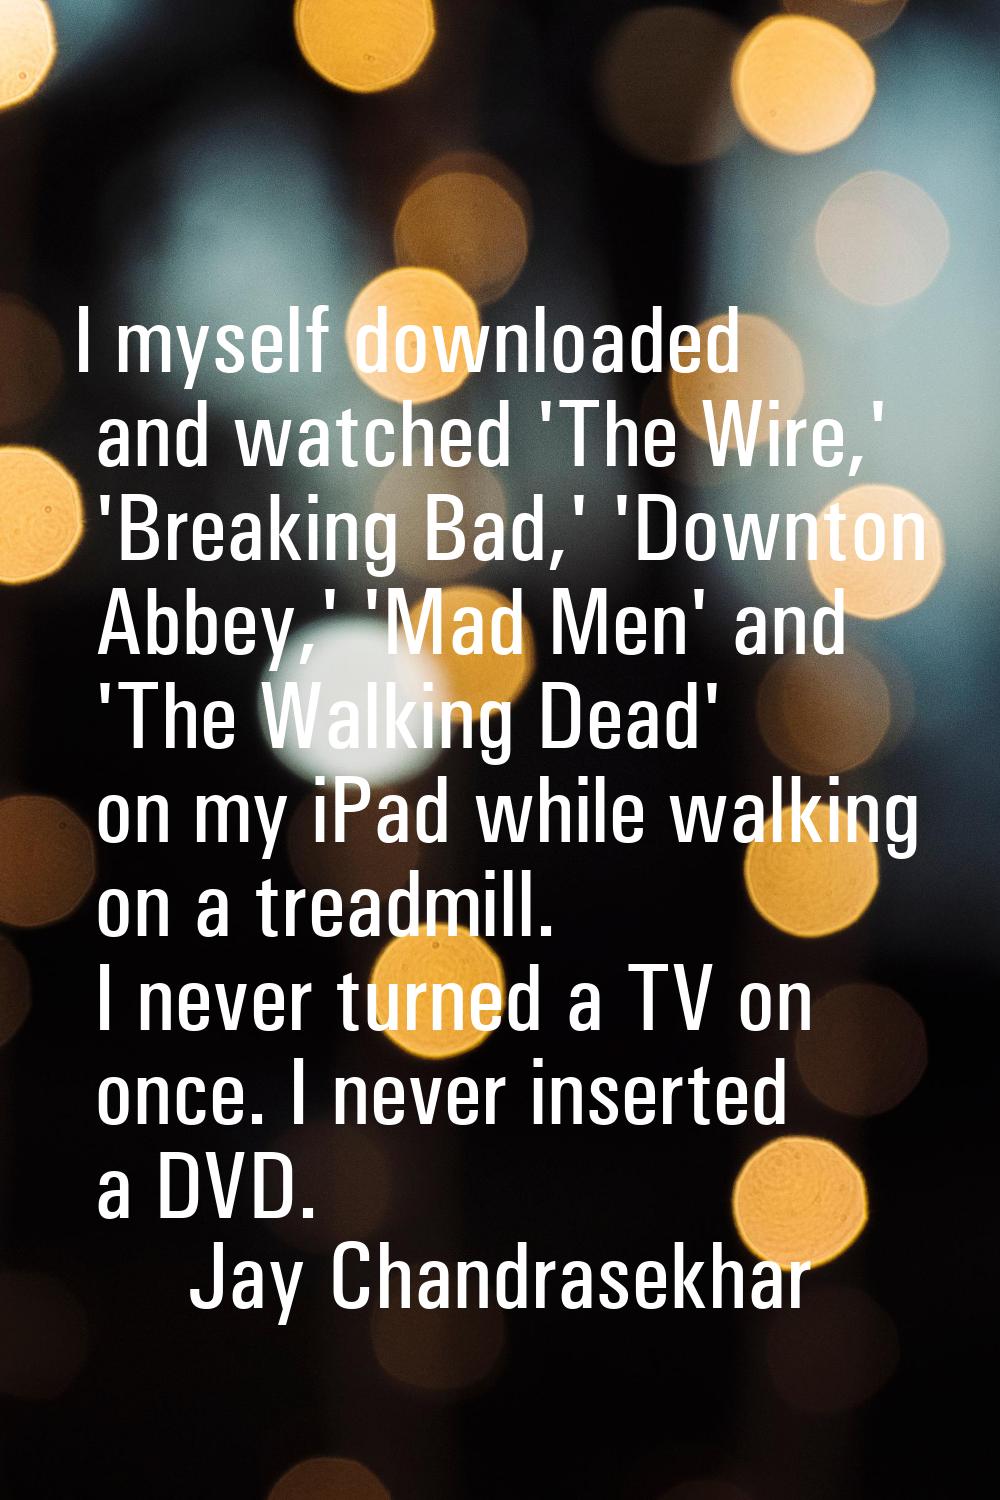 I myself downloaded and watched 'The Wire,' 'Breaking Bad,' 'Downton Abbey,' 'Mad Men' and 'The Wal